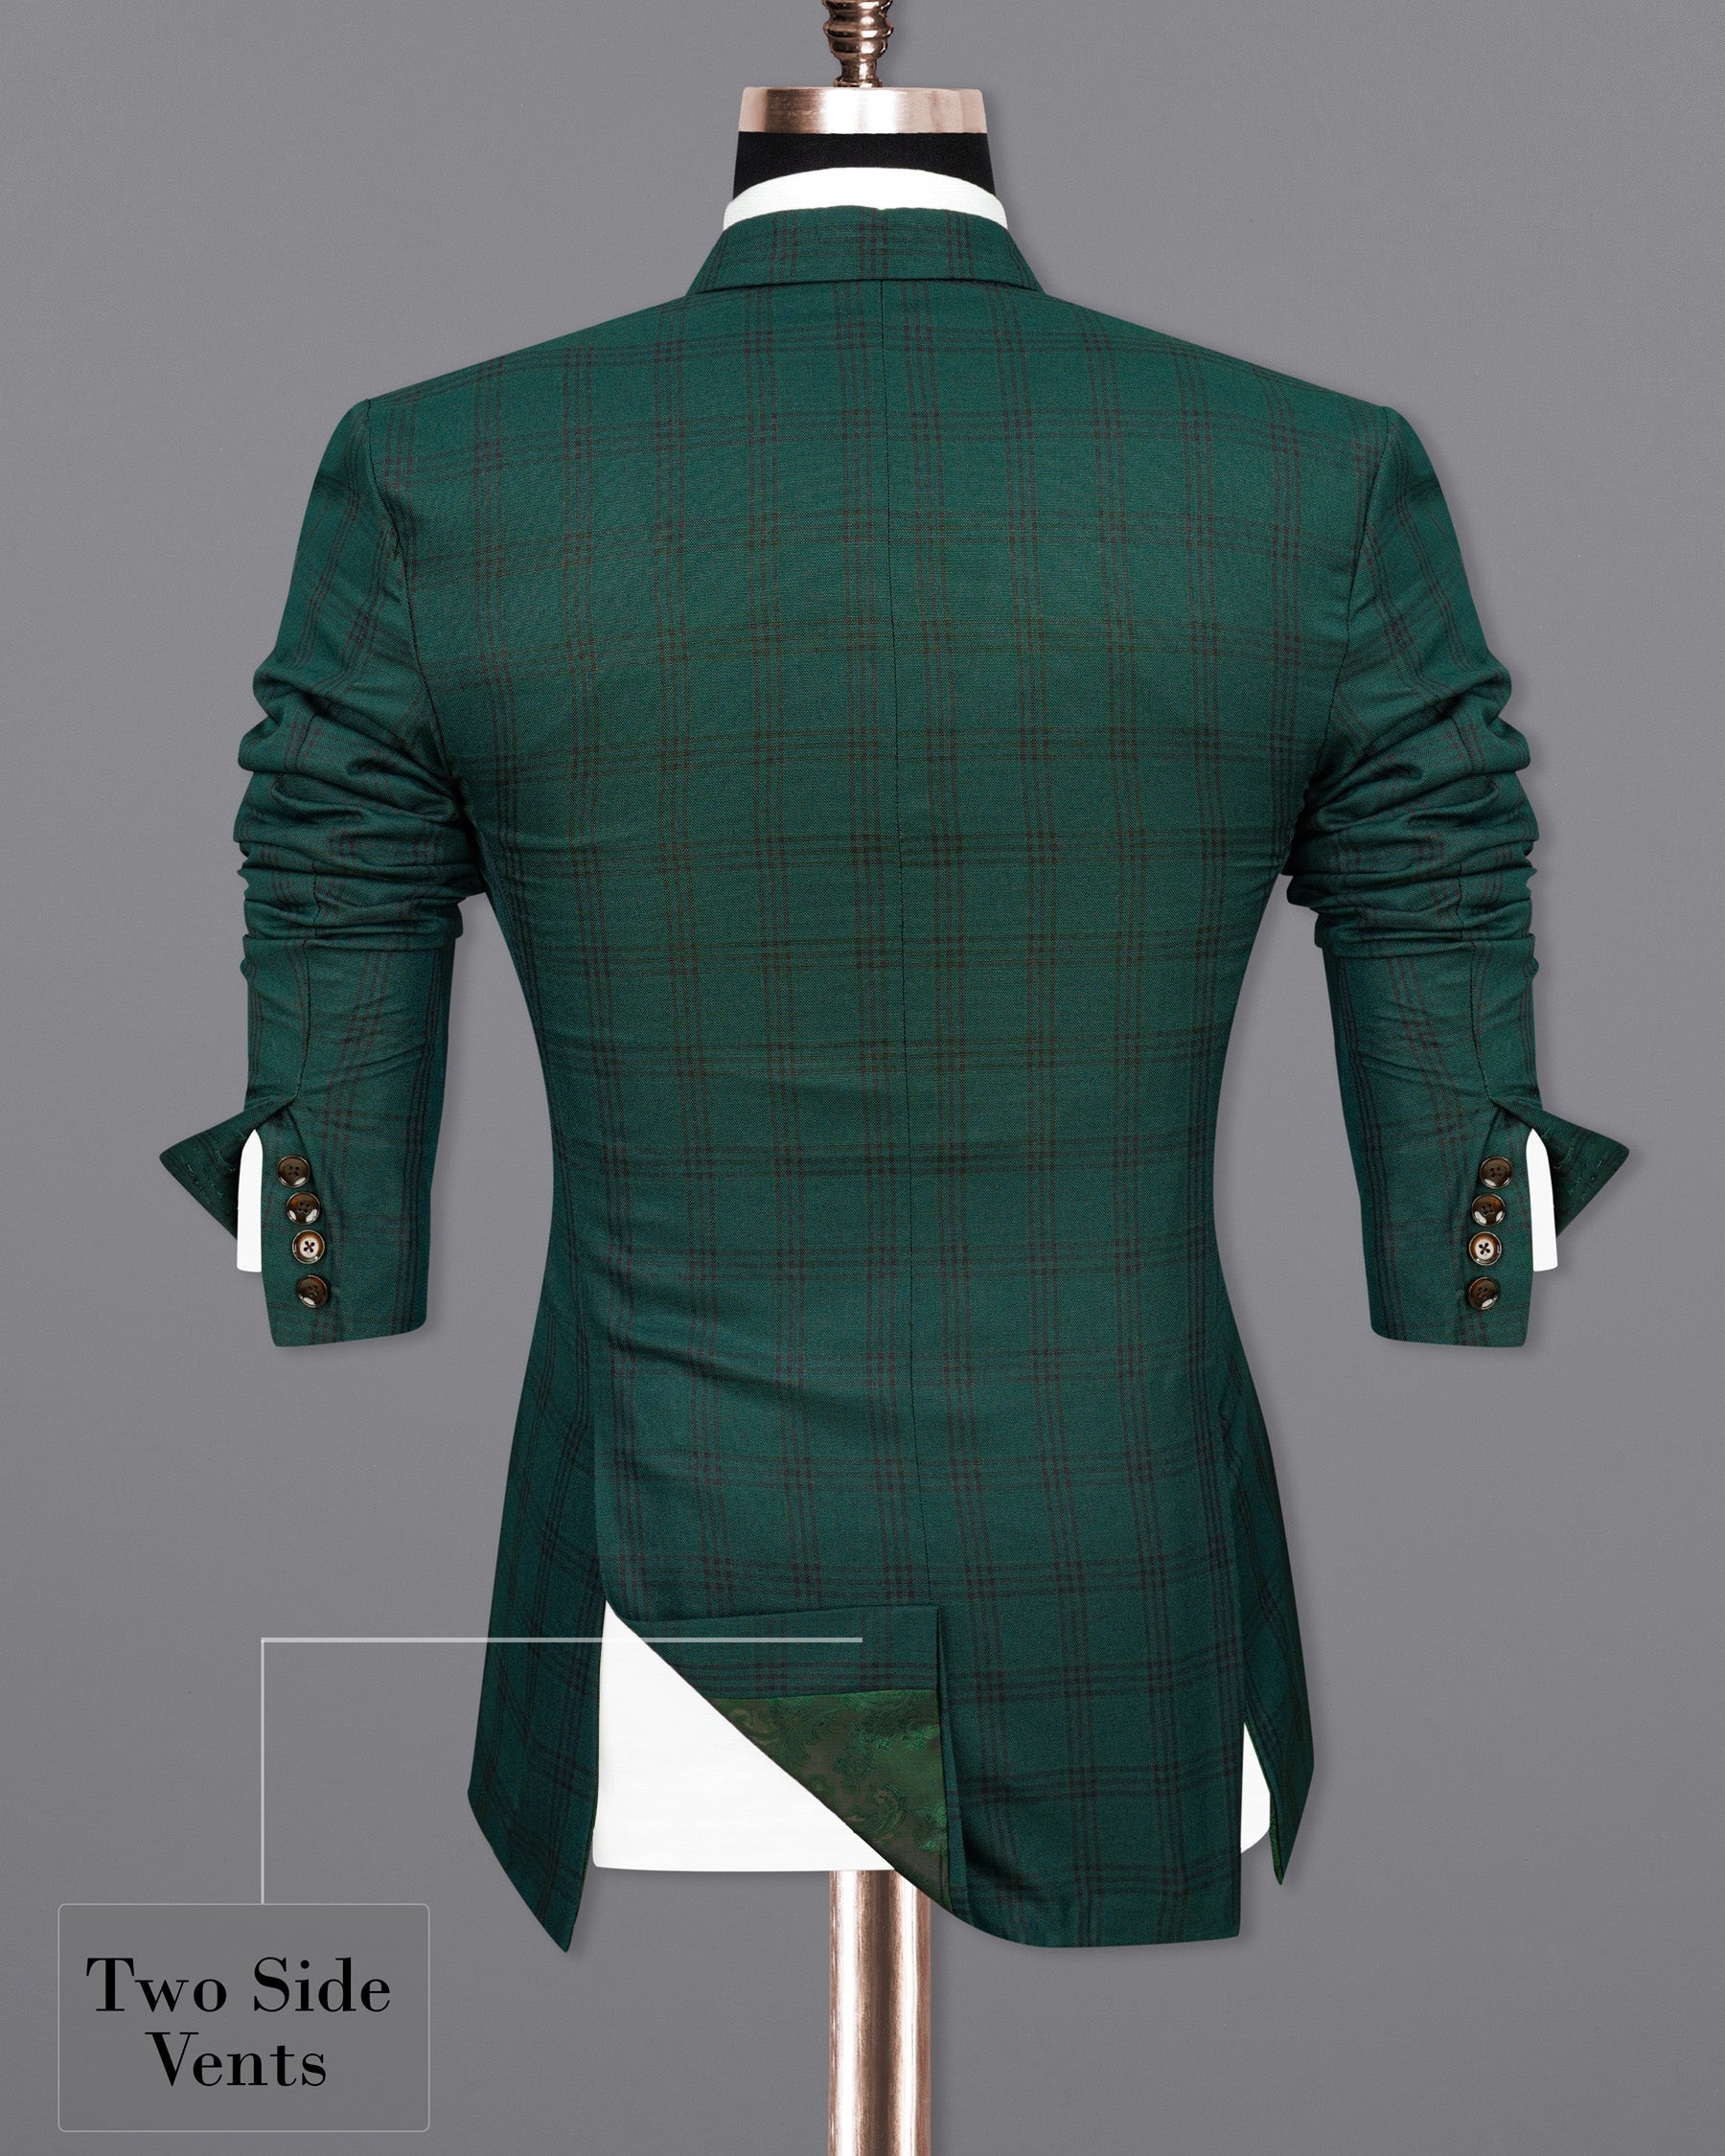 Timber Dark Green With Black Plaid Double Breasted Blazer BL1996-DB-36, BL1996-DB-38, BL1996-DB-40, BL1996-DB-42, BL1996-DB-44, BL1996-DB-46, BL1996-DB-48, BL1996-DB-50, BL1996-DB-52, BL1996-DB-54, BL1996-DB-56, BL1996-DB-58, BL1996-DB-60